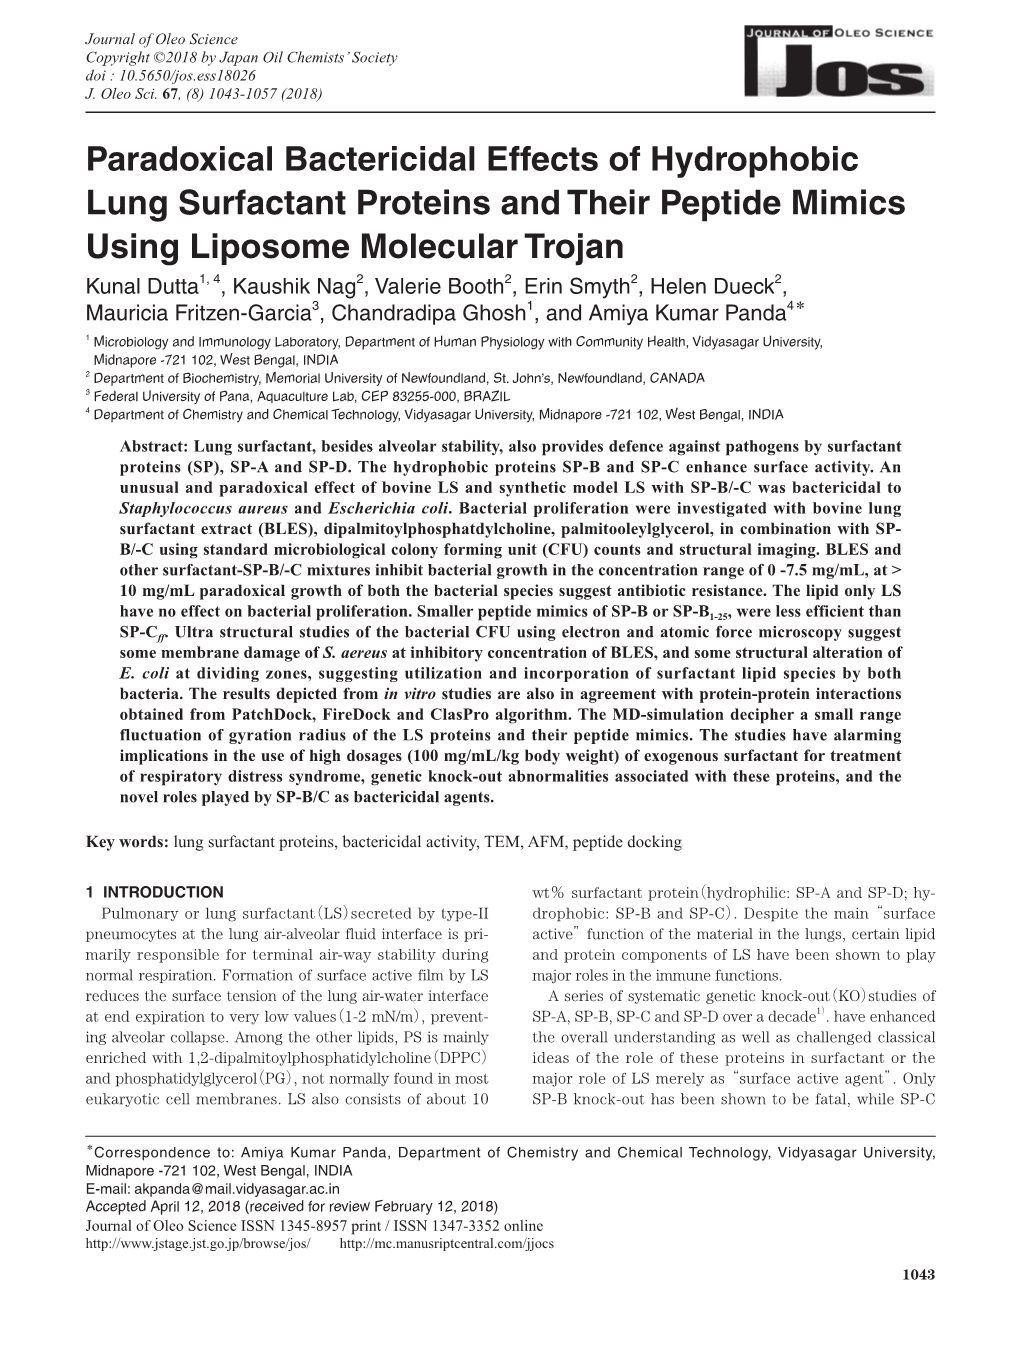 Paradoxical Bactericidal Effects of Hydrophobic Lung Surfactant Proteins and Their Peptide Mimics Using Liposome Molecular Troja